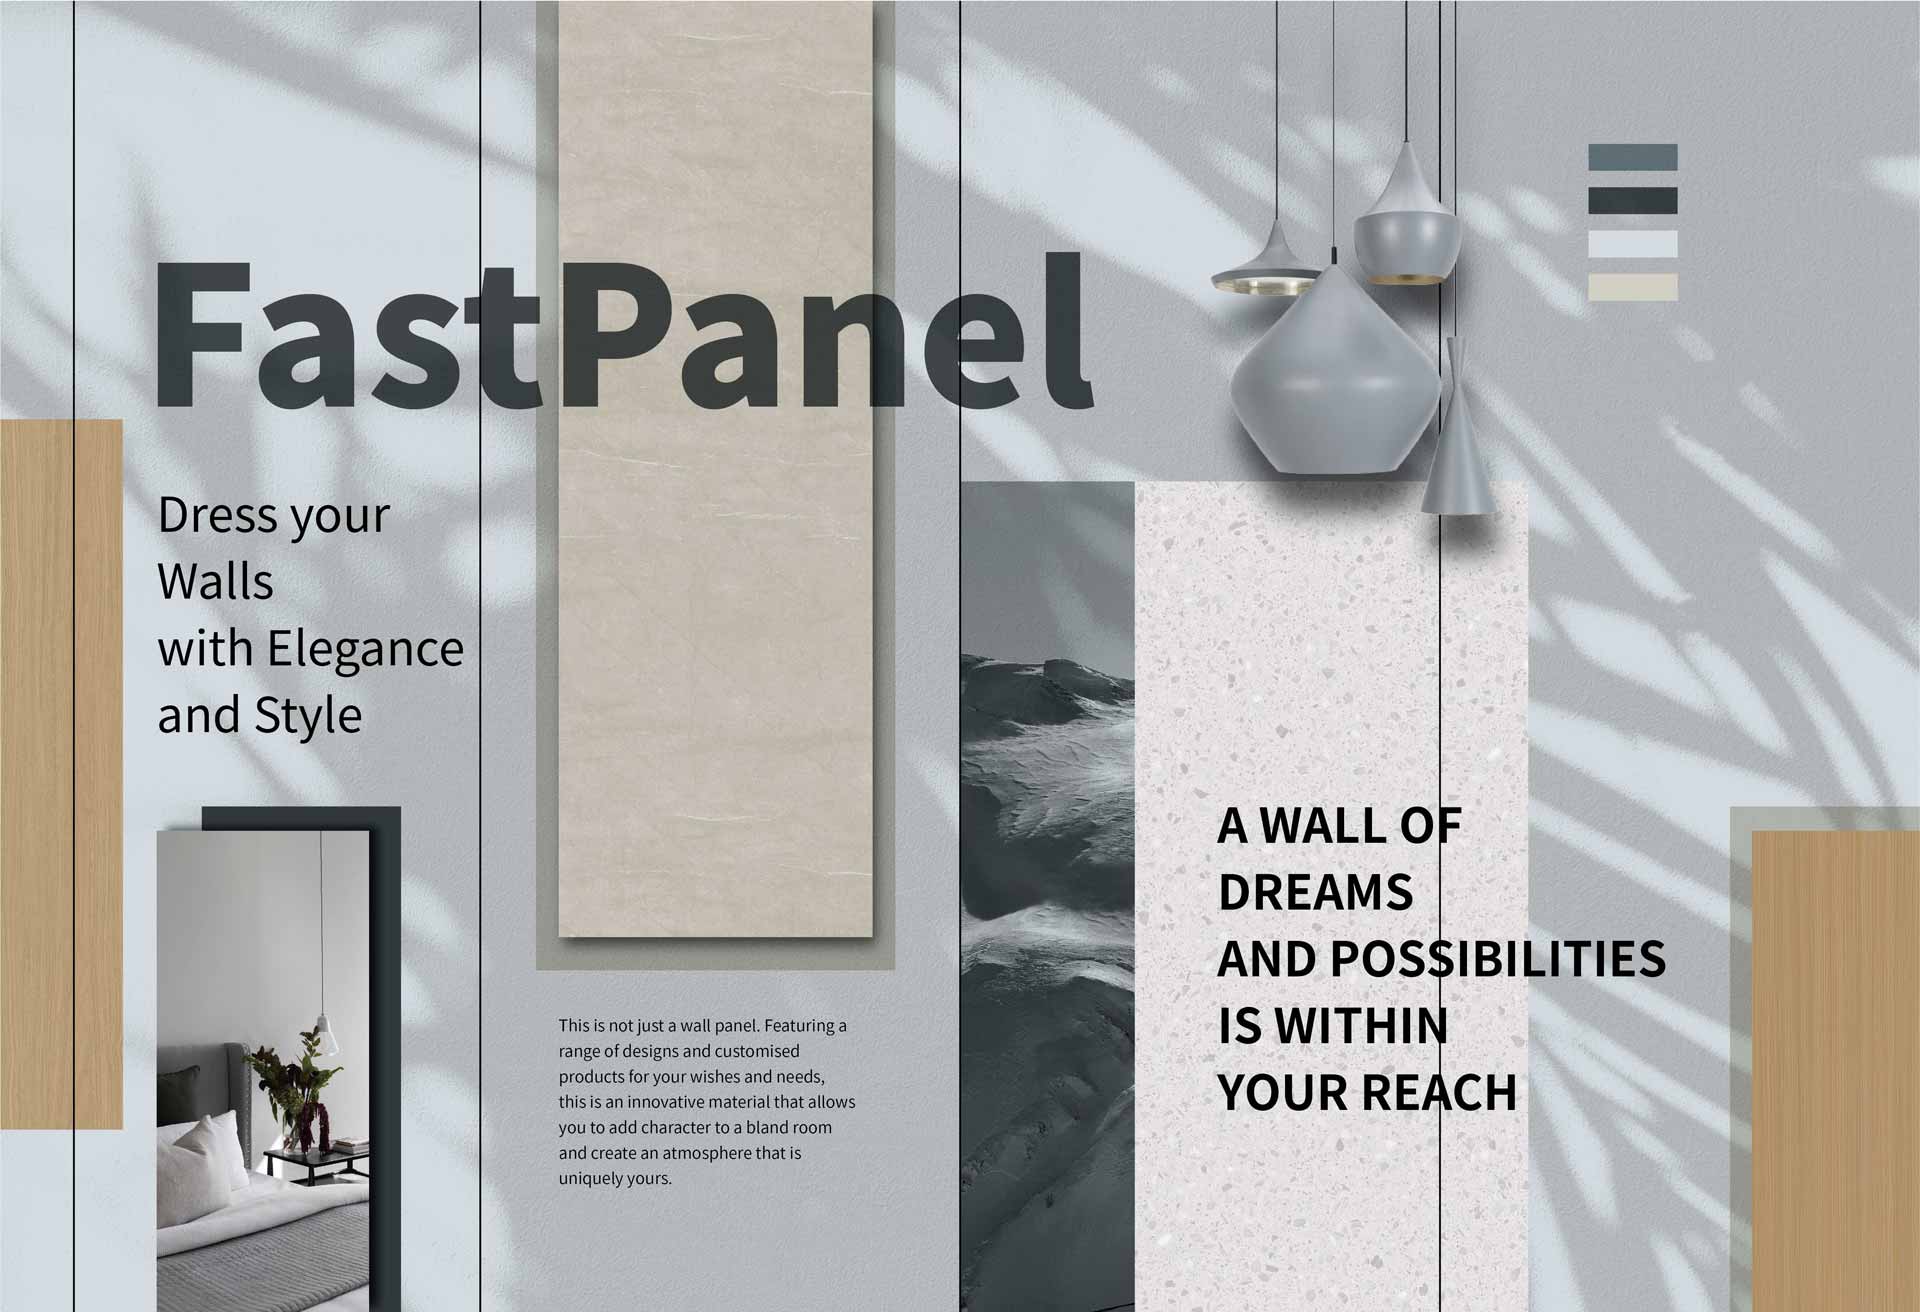  tiles is the traditional go-to product for many years, but actually they are by no means the perfect solution. Fortunately, a cutting edge of social housing design is here, SPC vinyl wall panels!